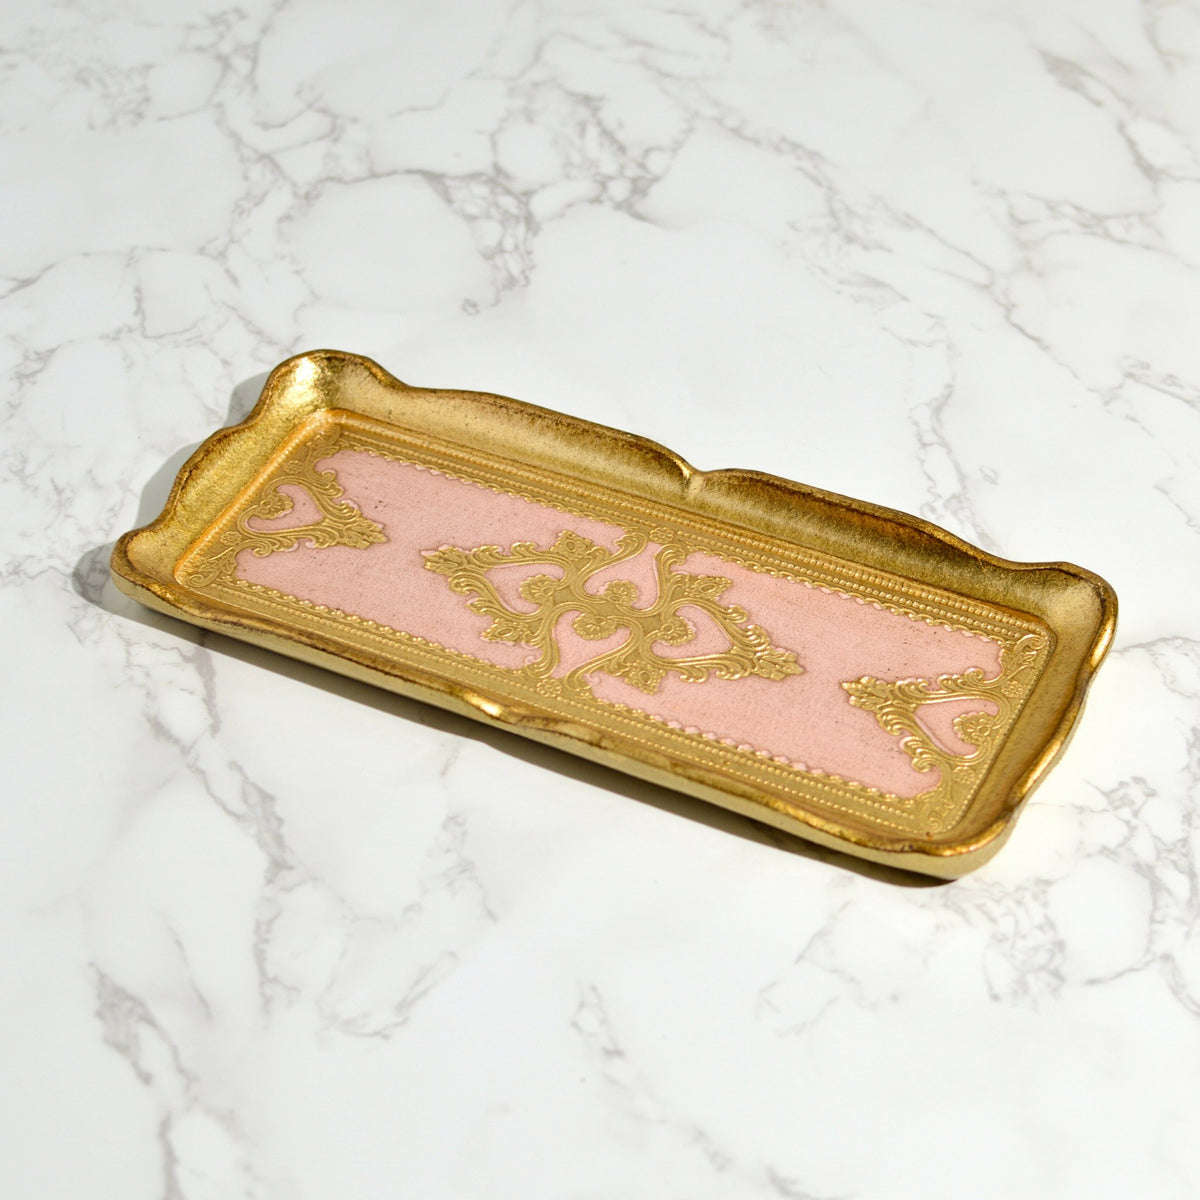 Florentine Carved Gilded Wood Narrow Tray, Made in Italy - My Italian Decor